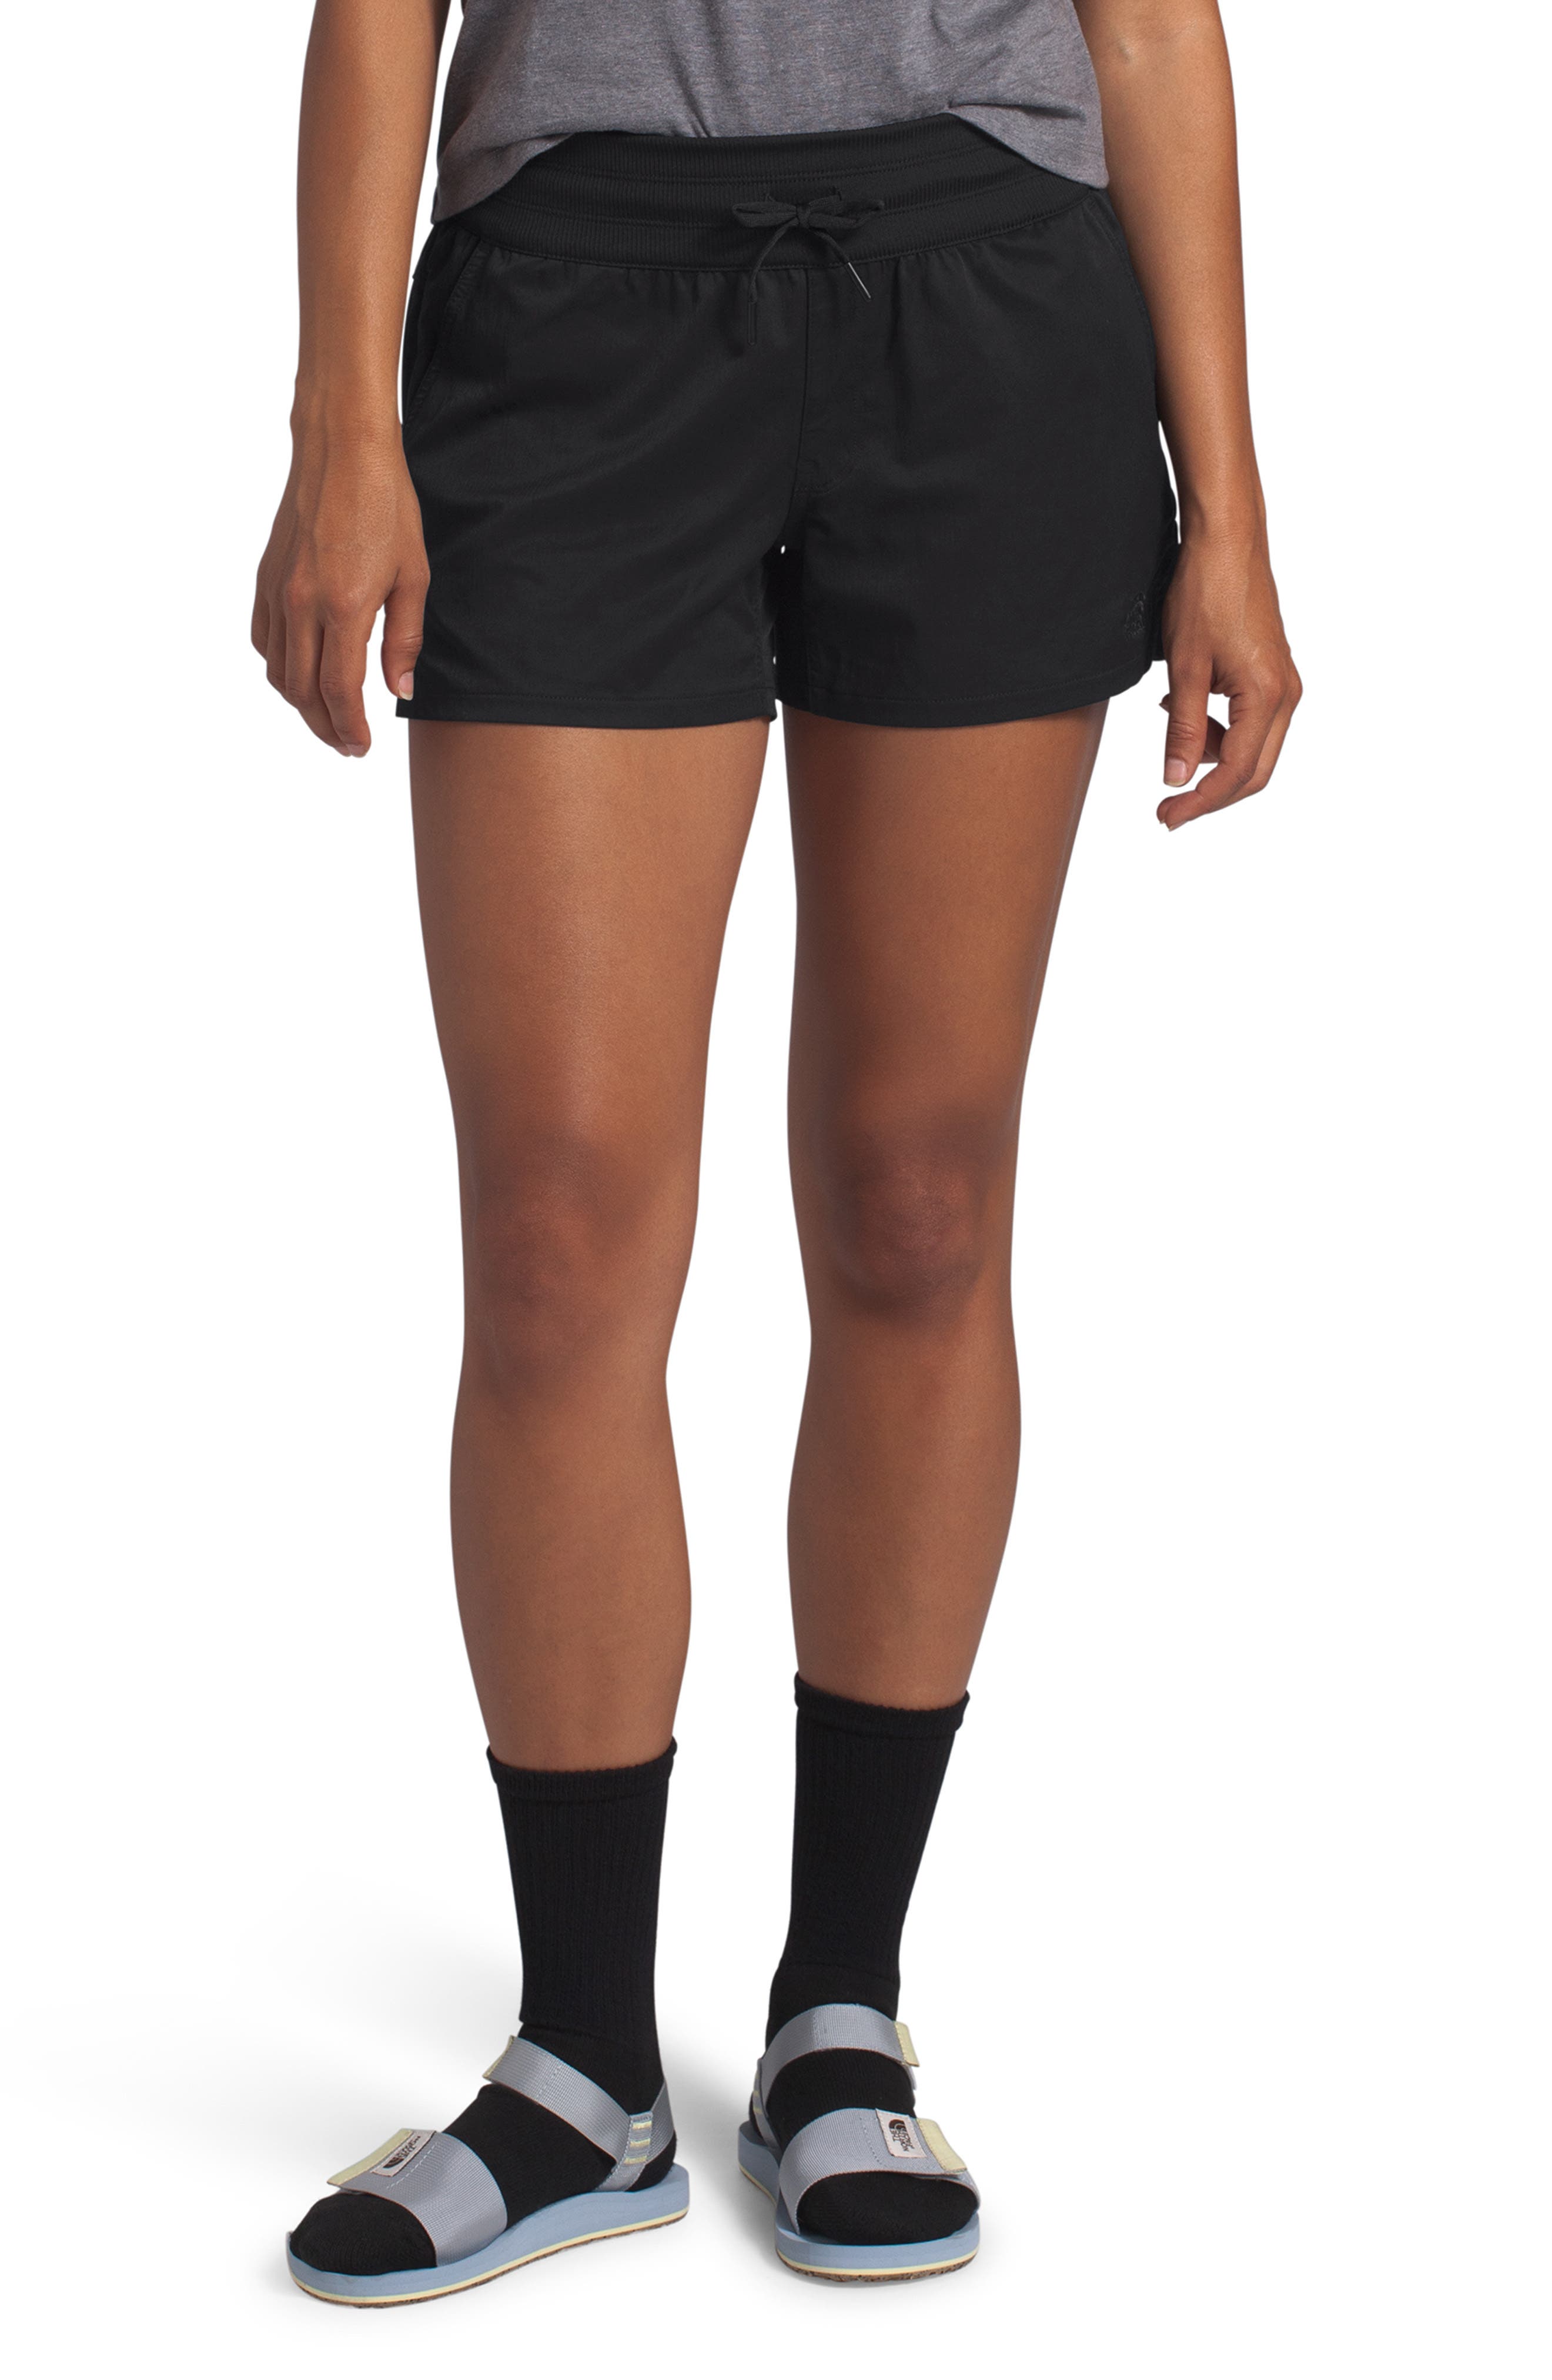 north face athletic shorts